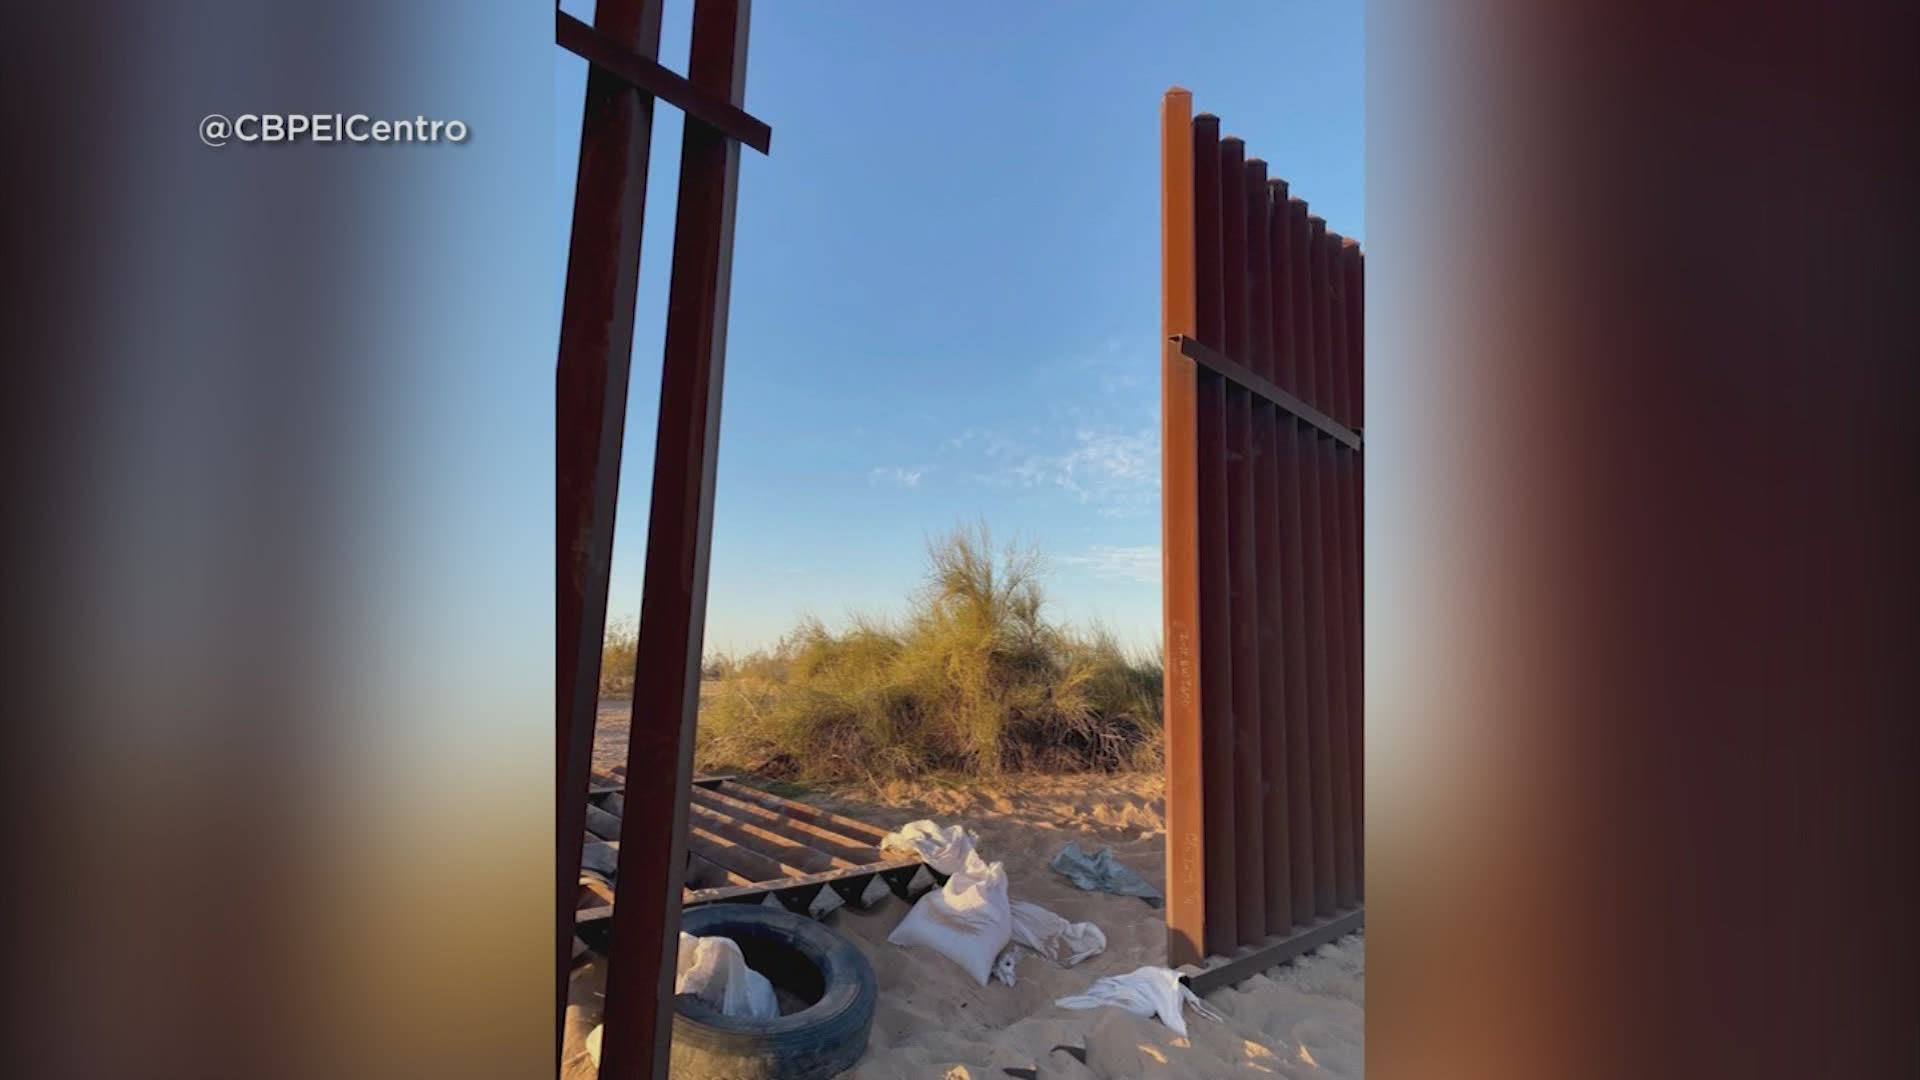 The hole in the California-Mexico fence that allowed 2 vehicles through with undocumented immigrants has been repaired by Border Patrol the day after a deadly crash.